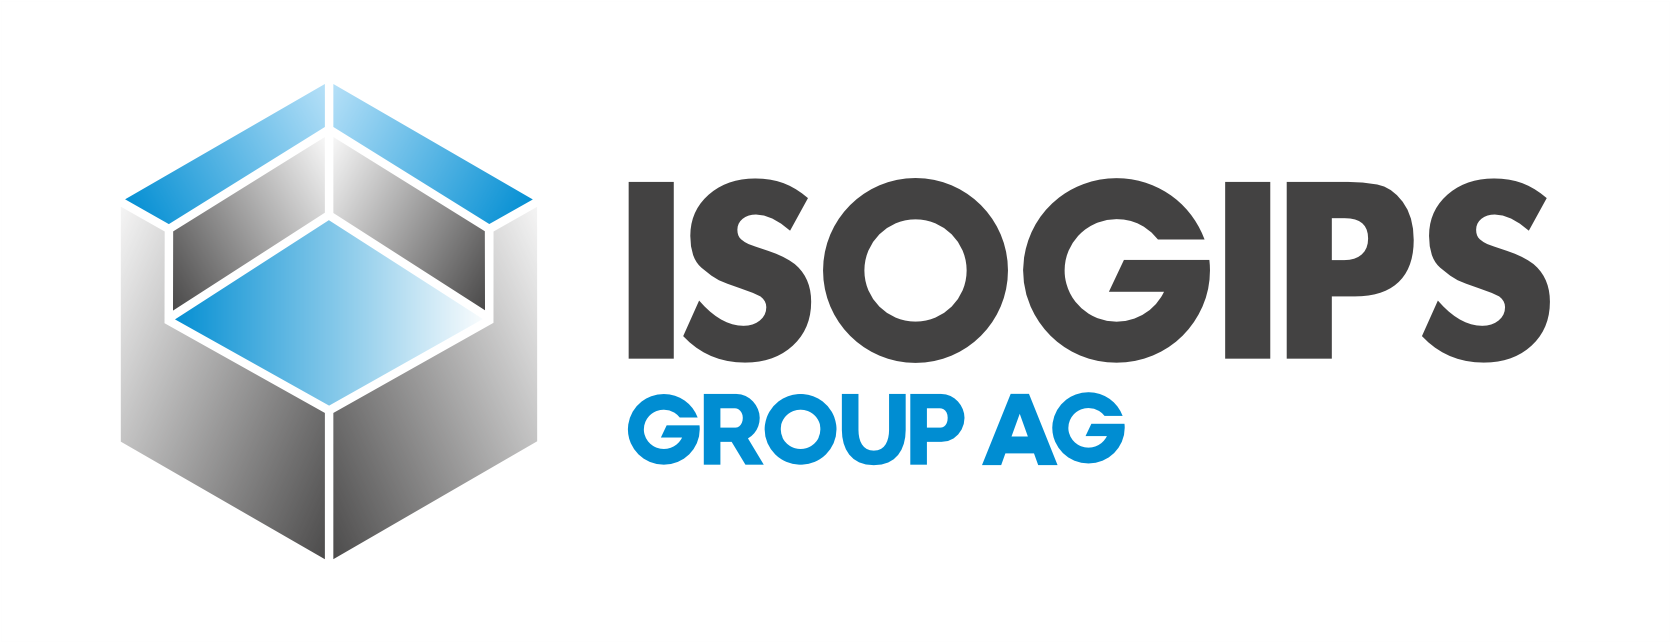 Isogips Group AG